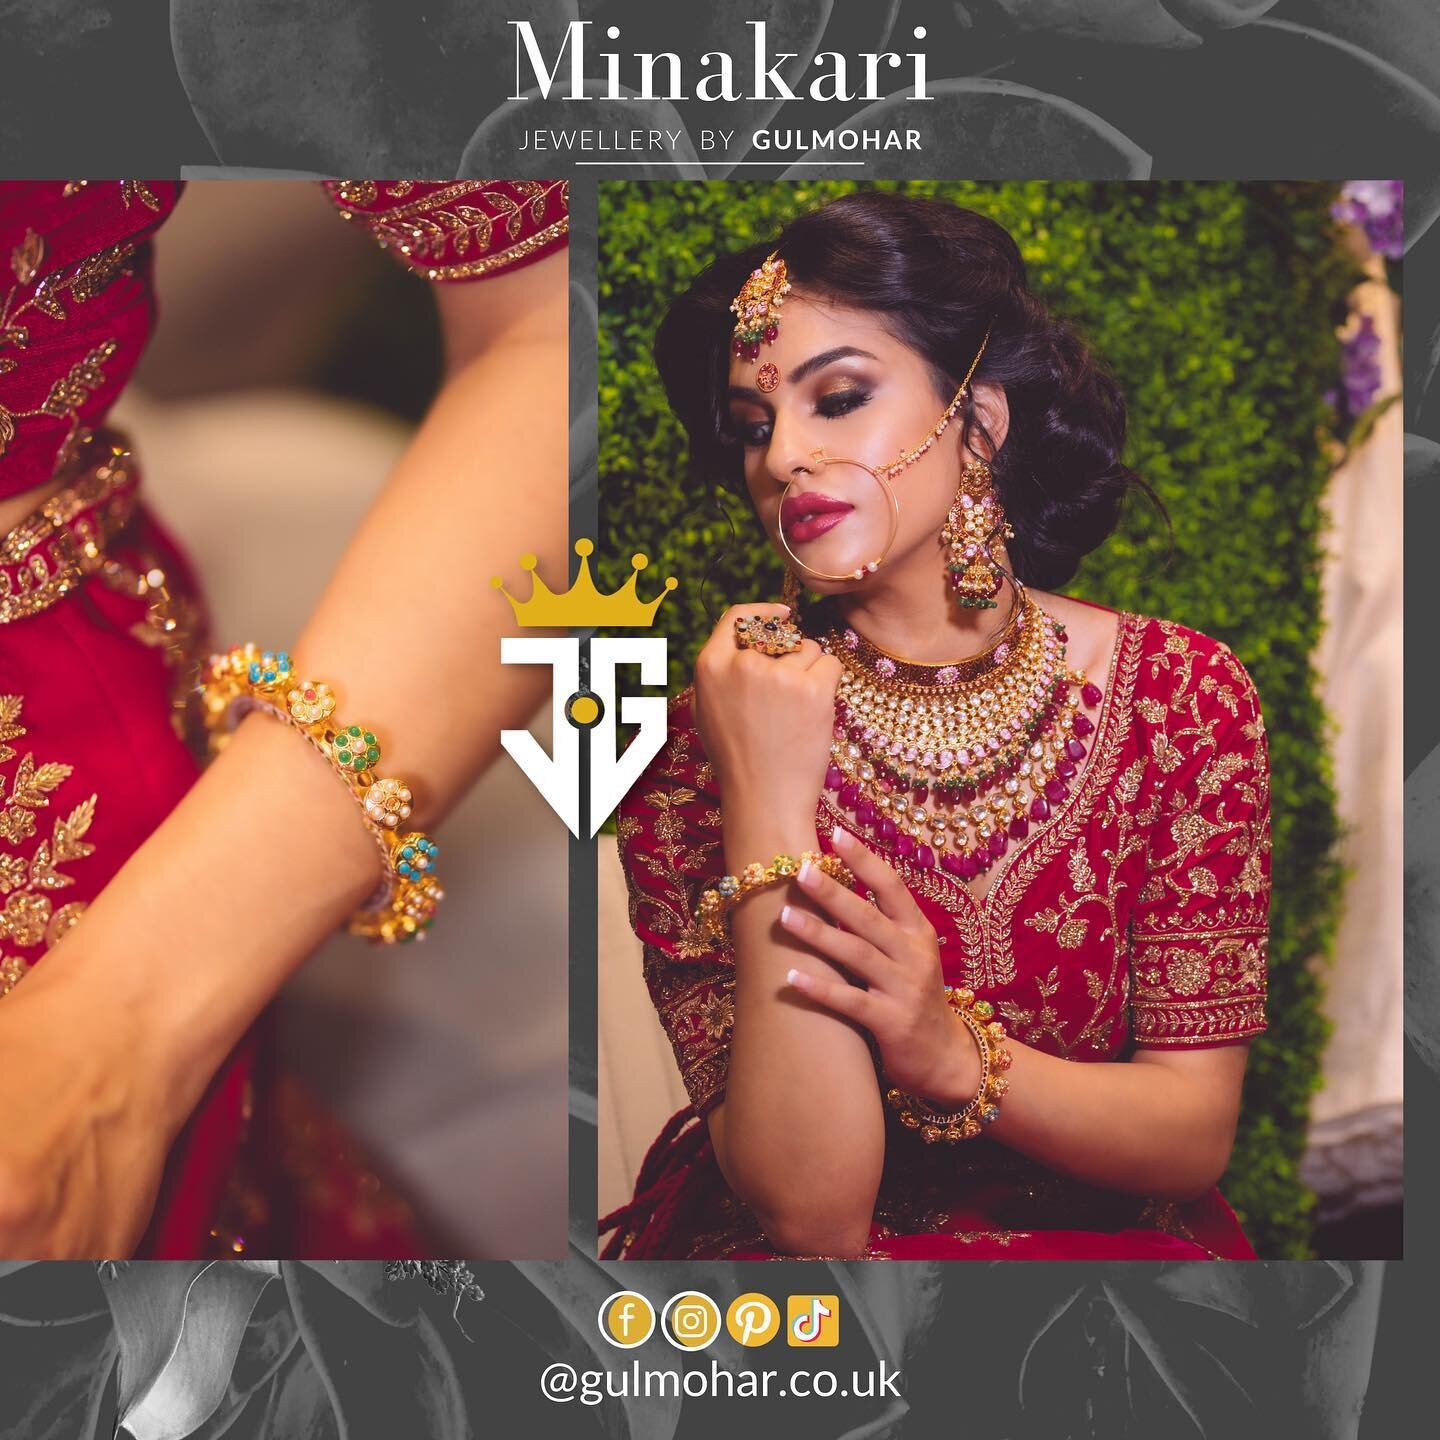 Hand Painted Minakari Artwork Bridal Set Exhibited in this beautiful bridal campaign.
.
.
&ldquo;Talent wins games, but teamwork and intelligence win championships.&rdquo;
.
TEAM CREW
Makeup @ruheena_k_artistry 
Hairstyle @hairbyvijay 
Jewellery @gul